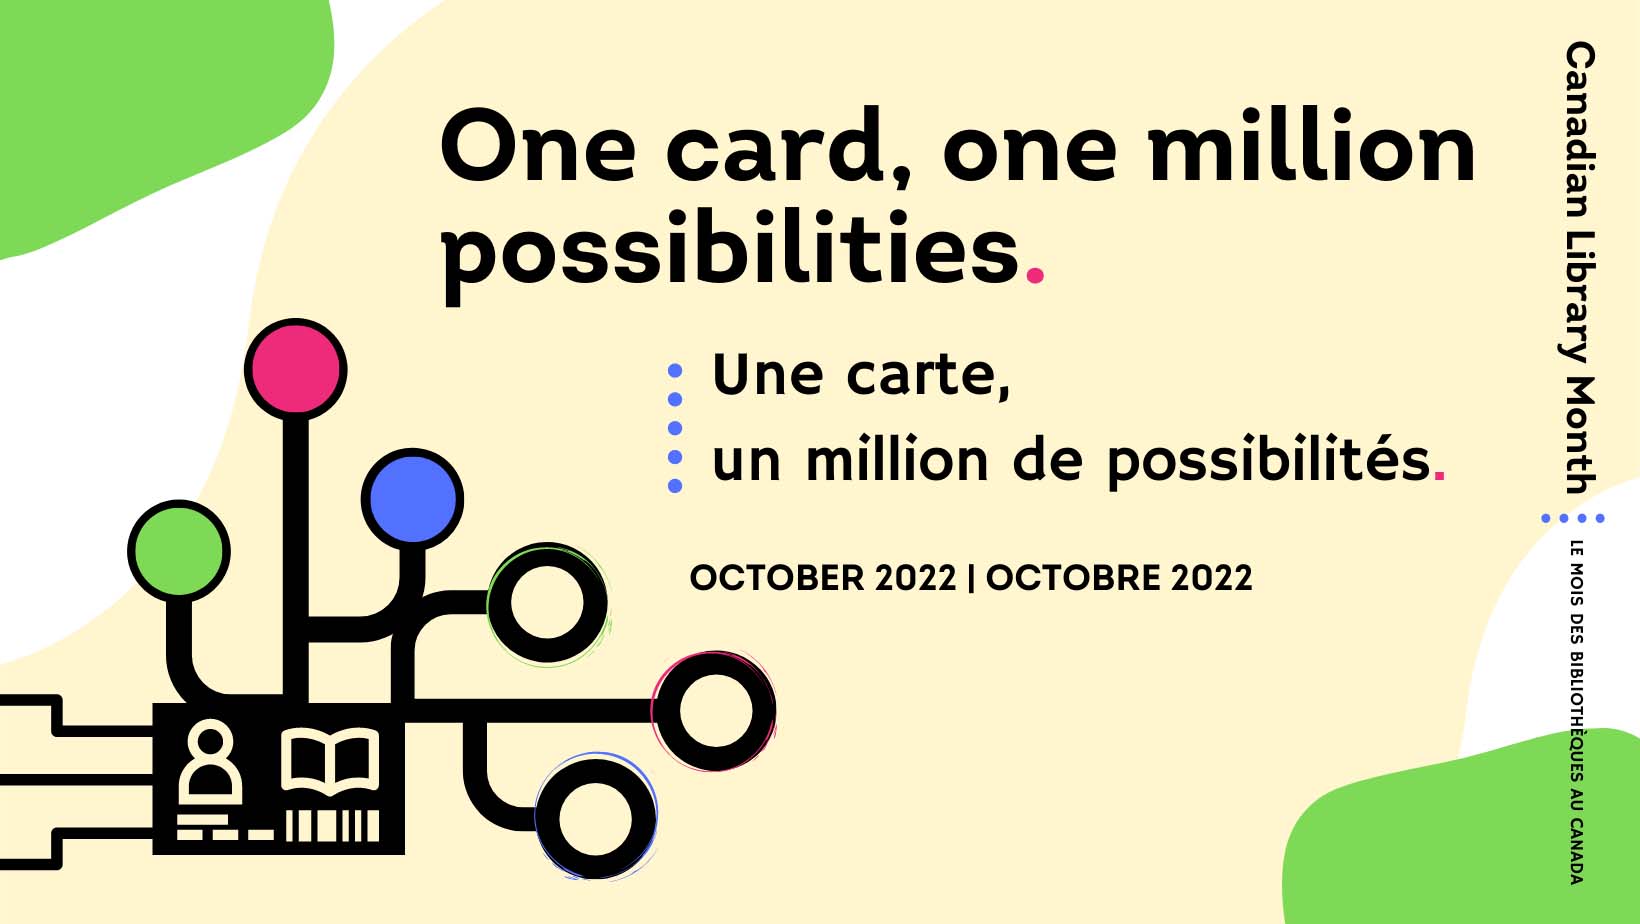 One card, one million possibilities.